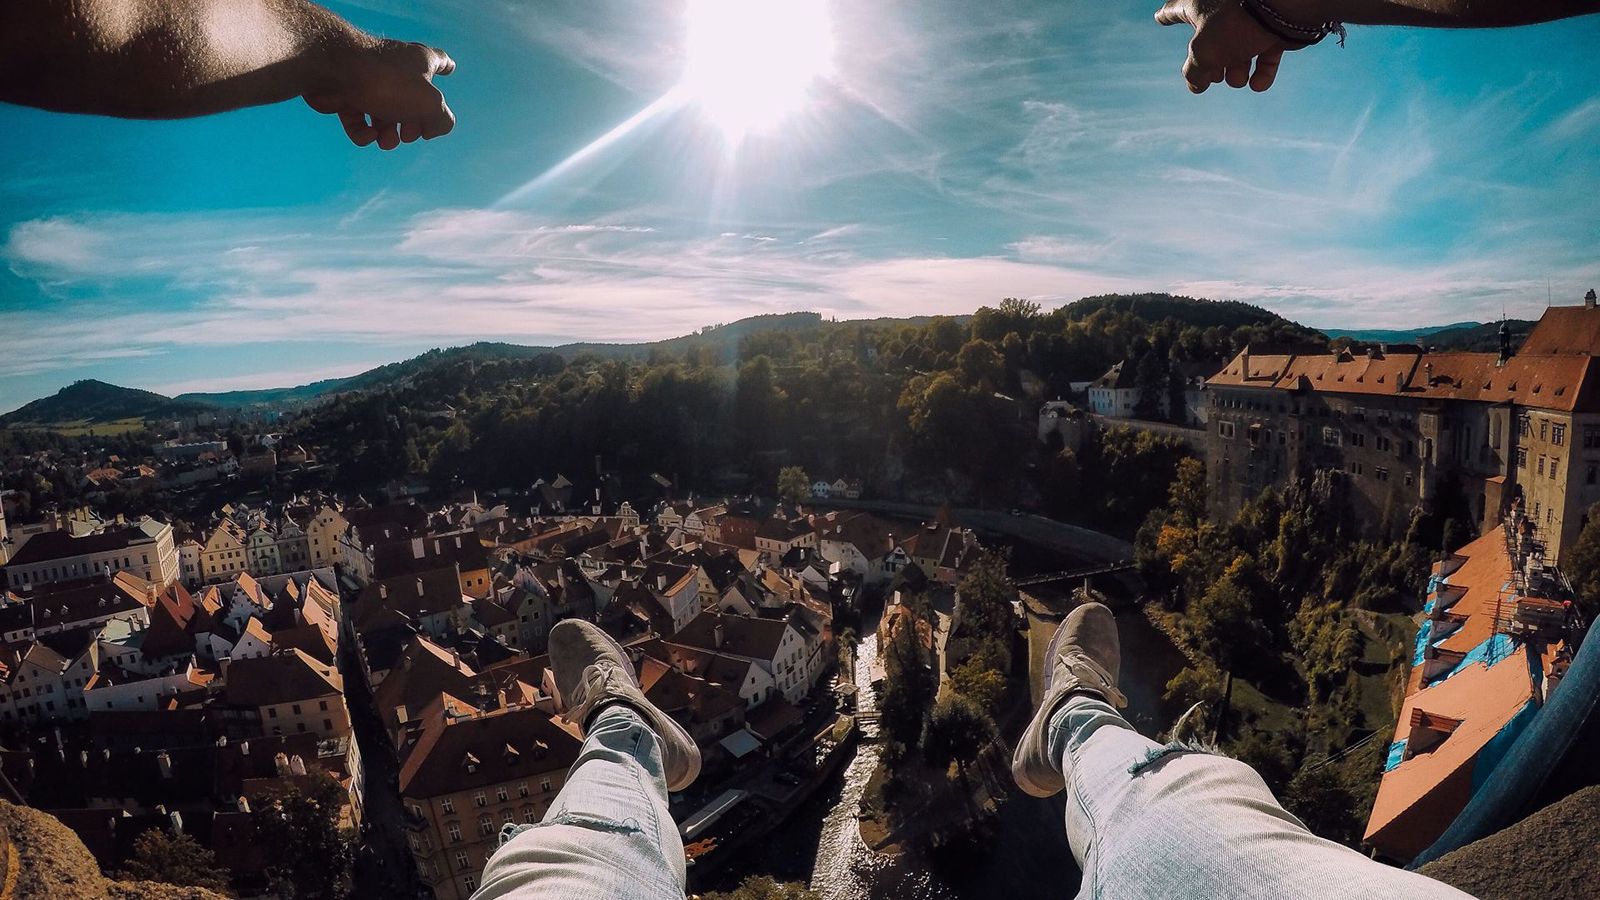 the best gopro photos in the world prepare to lose your breath image 31